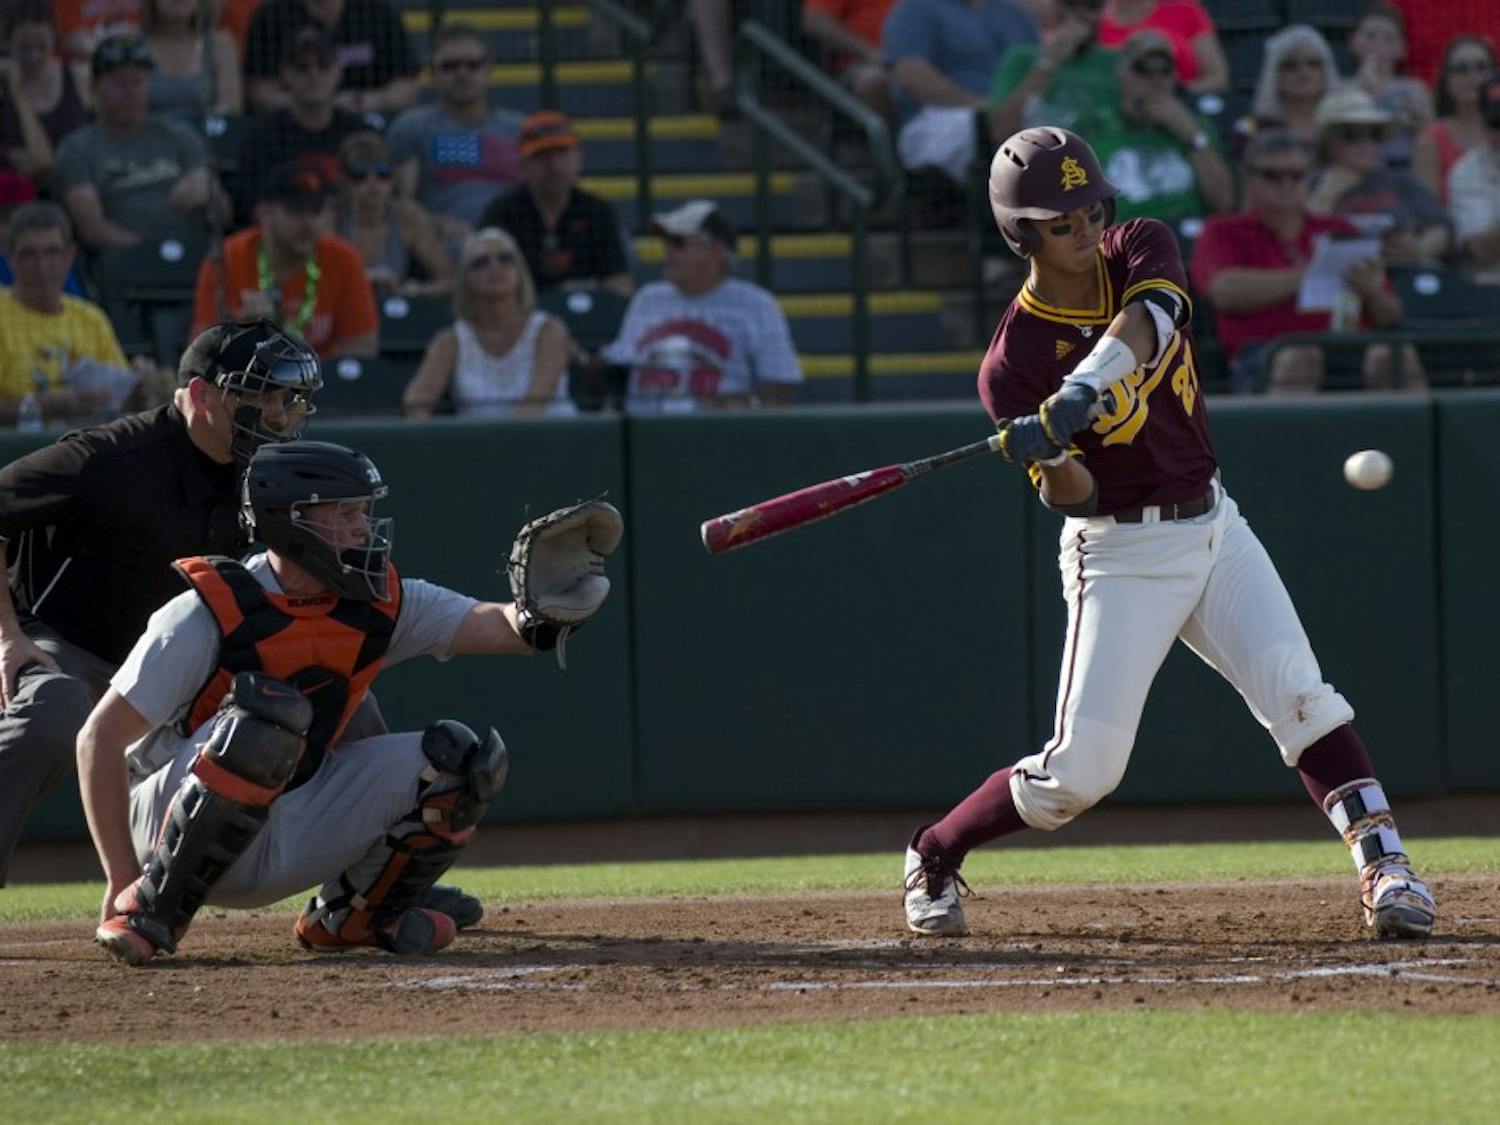 ASU freshman infielder Lyle Lin (27) swings the bat during game two of a baseball series against the Oregon State Beavers at Phoenix Municipal Stadium in Phoenix on Friday, March 17, 2017. ASU lost 10-1. 